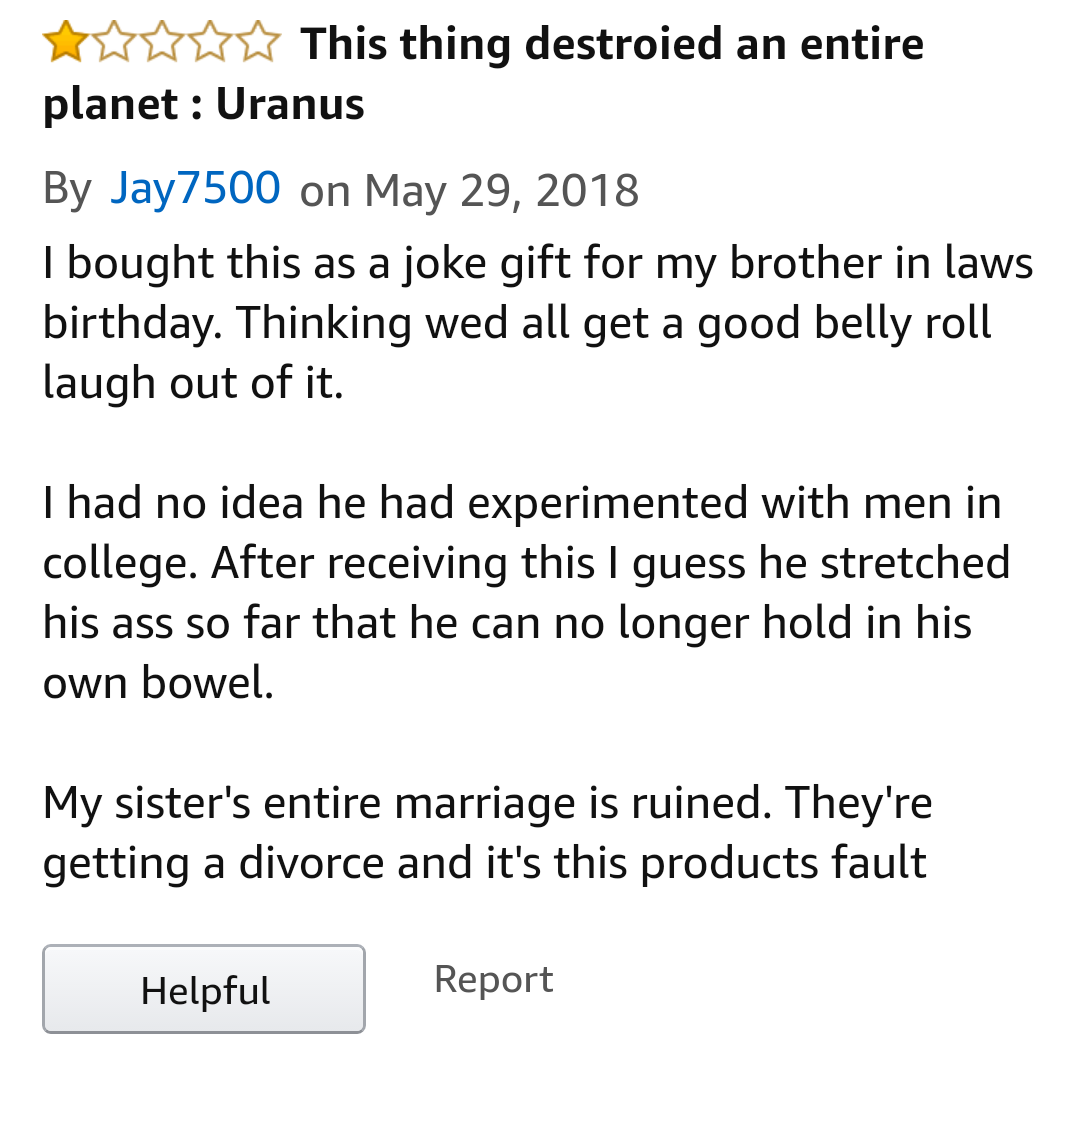 Guy Gets His Brother in Law a Joke Gift and Destroys a Marriage by Mistake